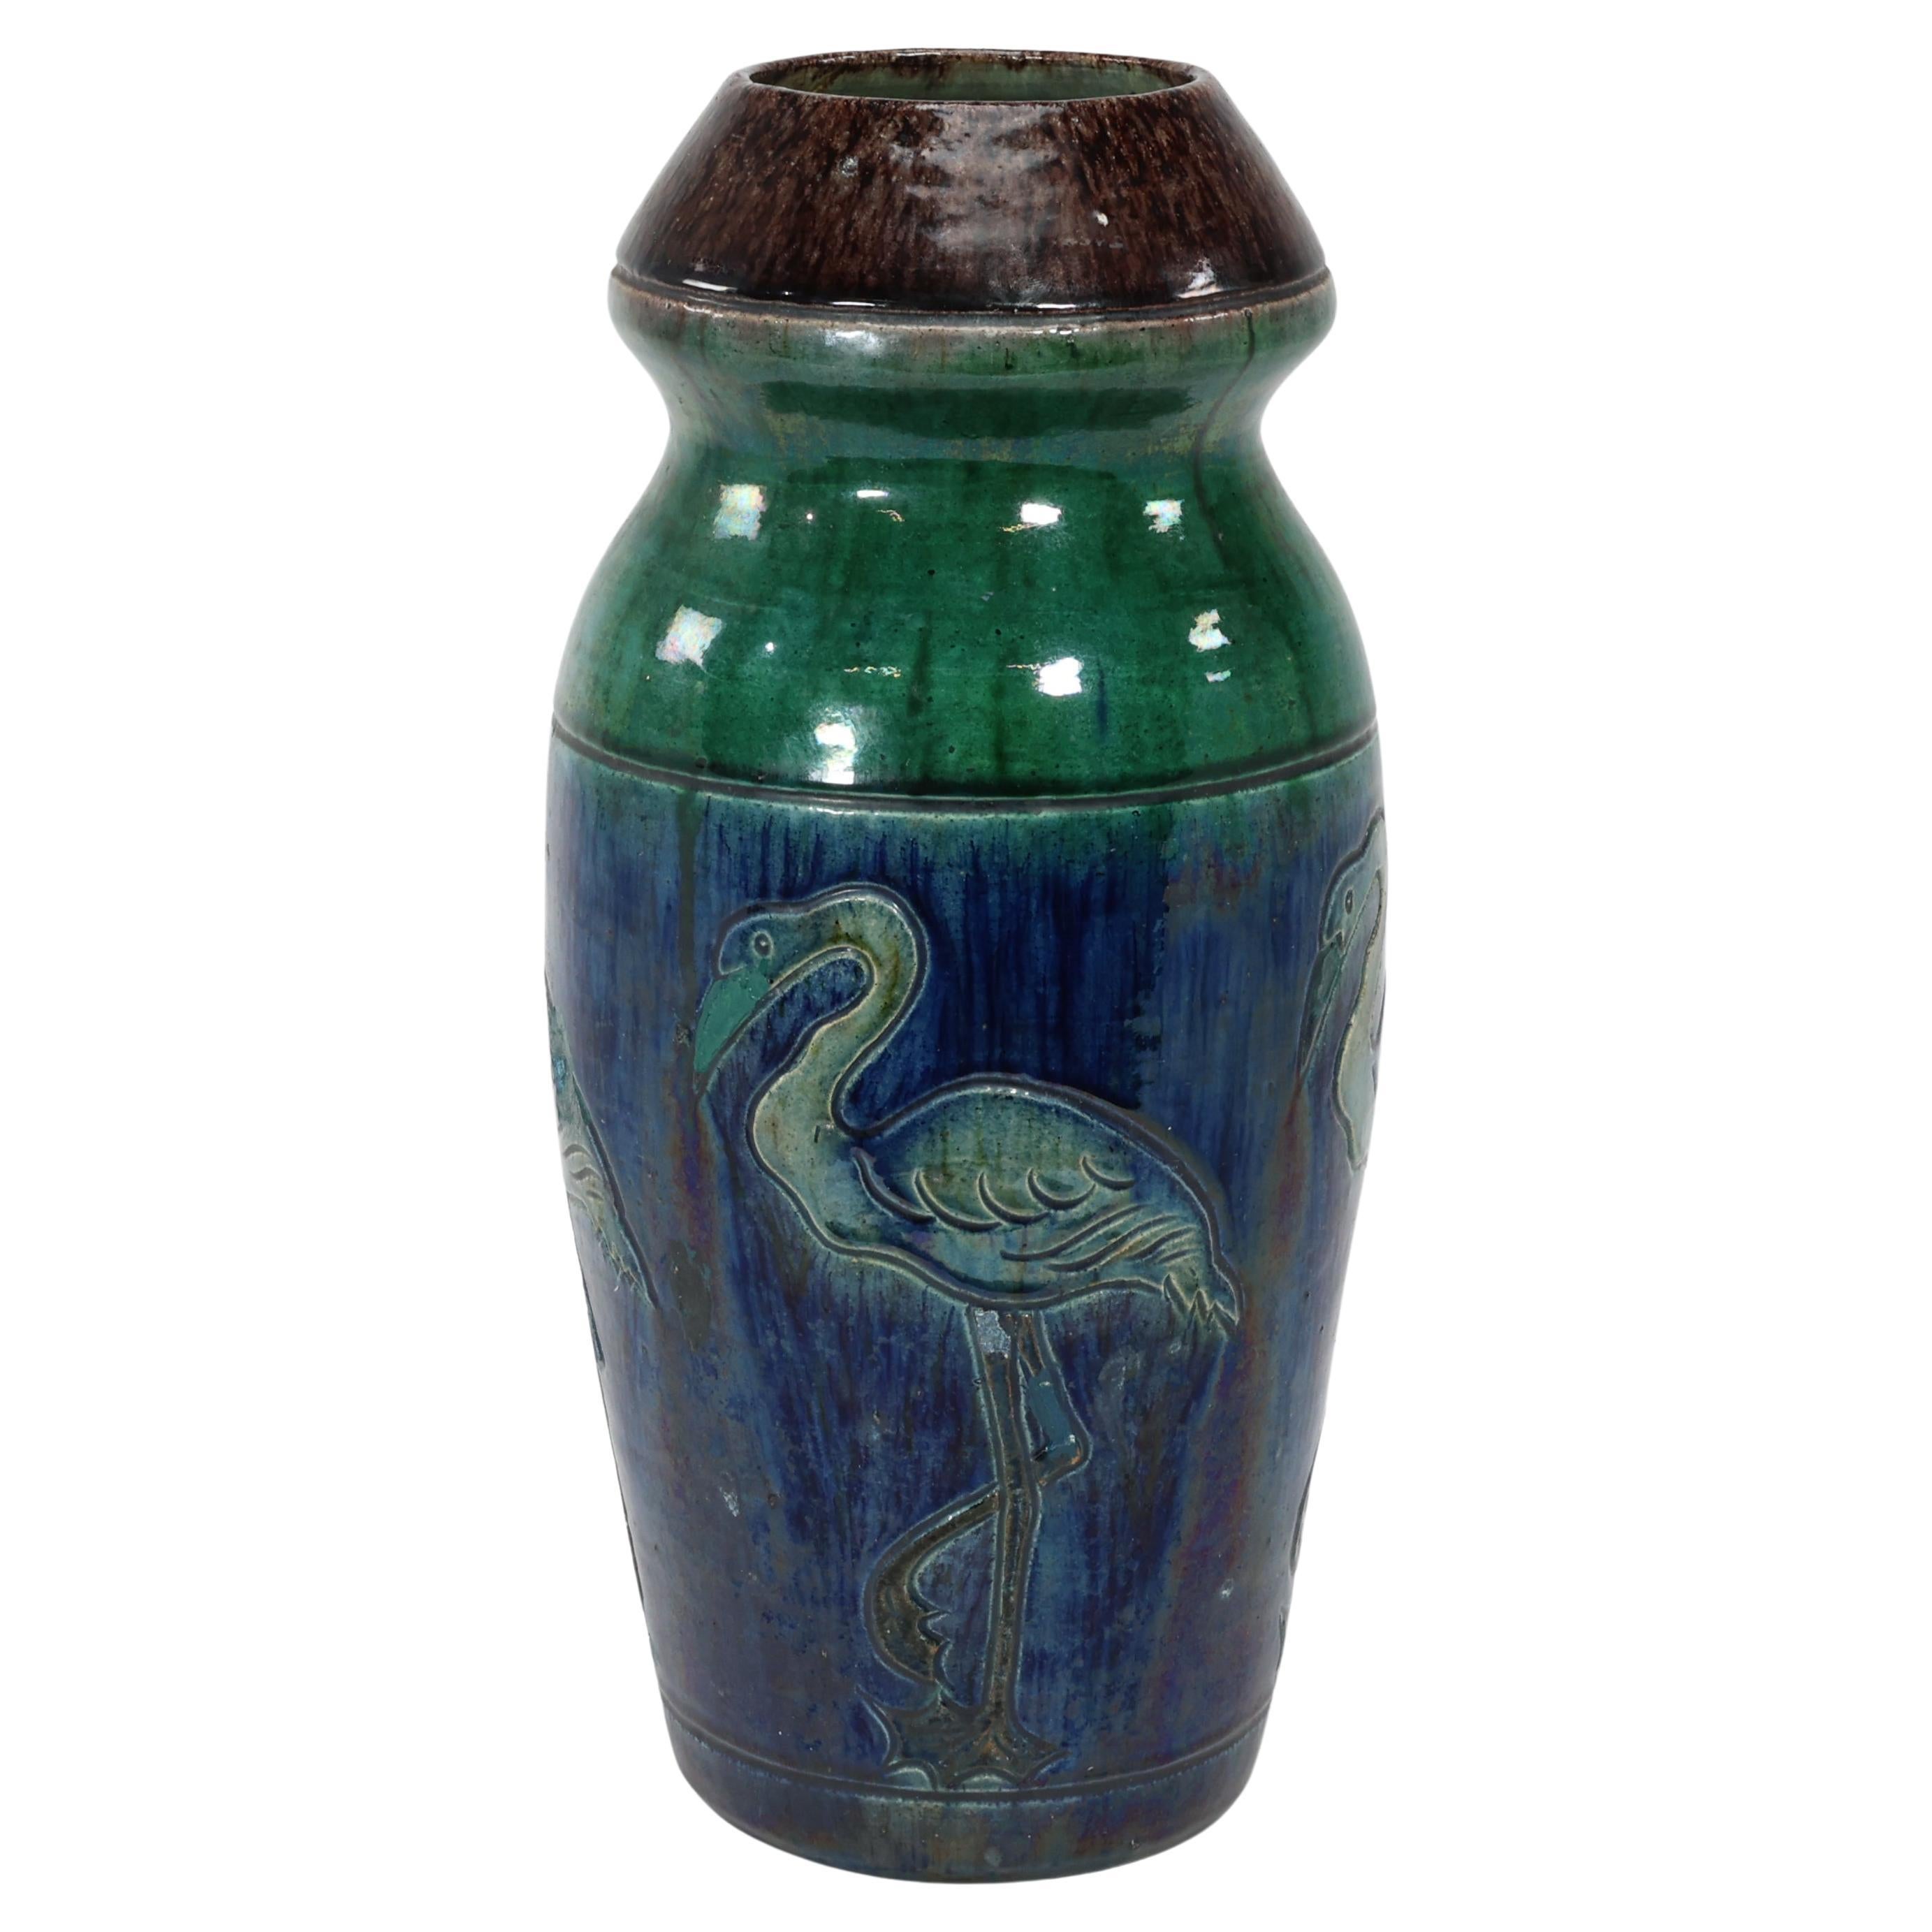 Belgium Art Pottery. Tall ceramic Arts & Crafts vase decorated with 5 Flamingos. For Sale